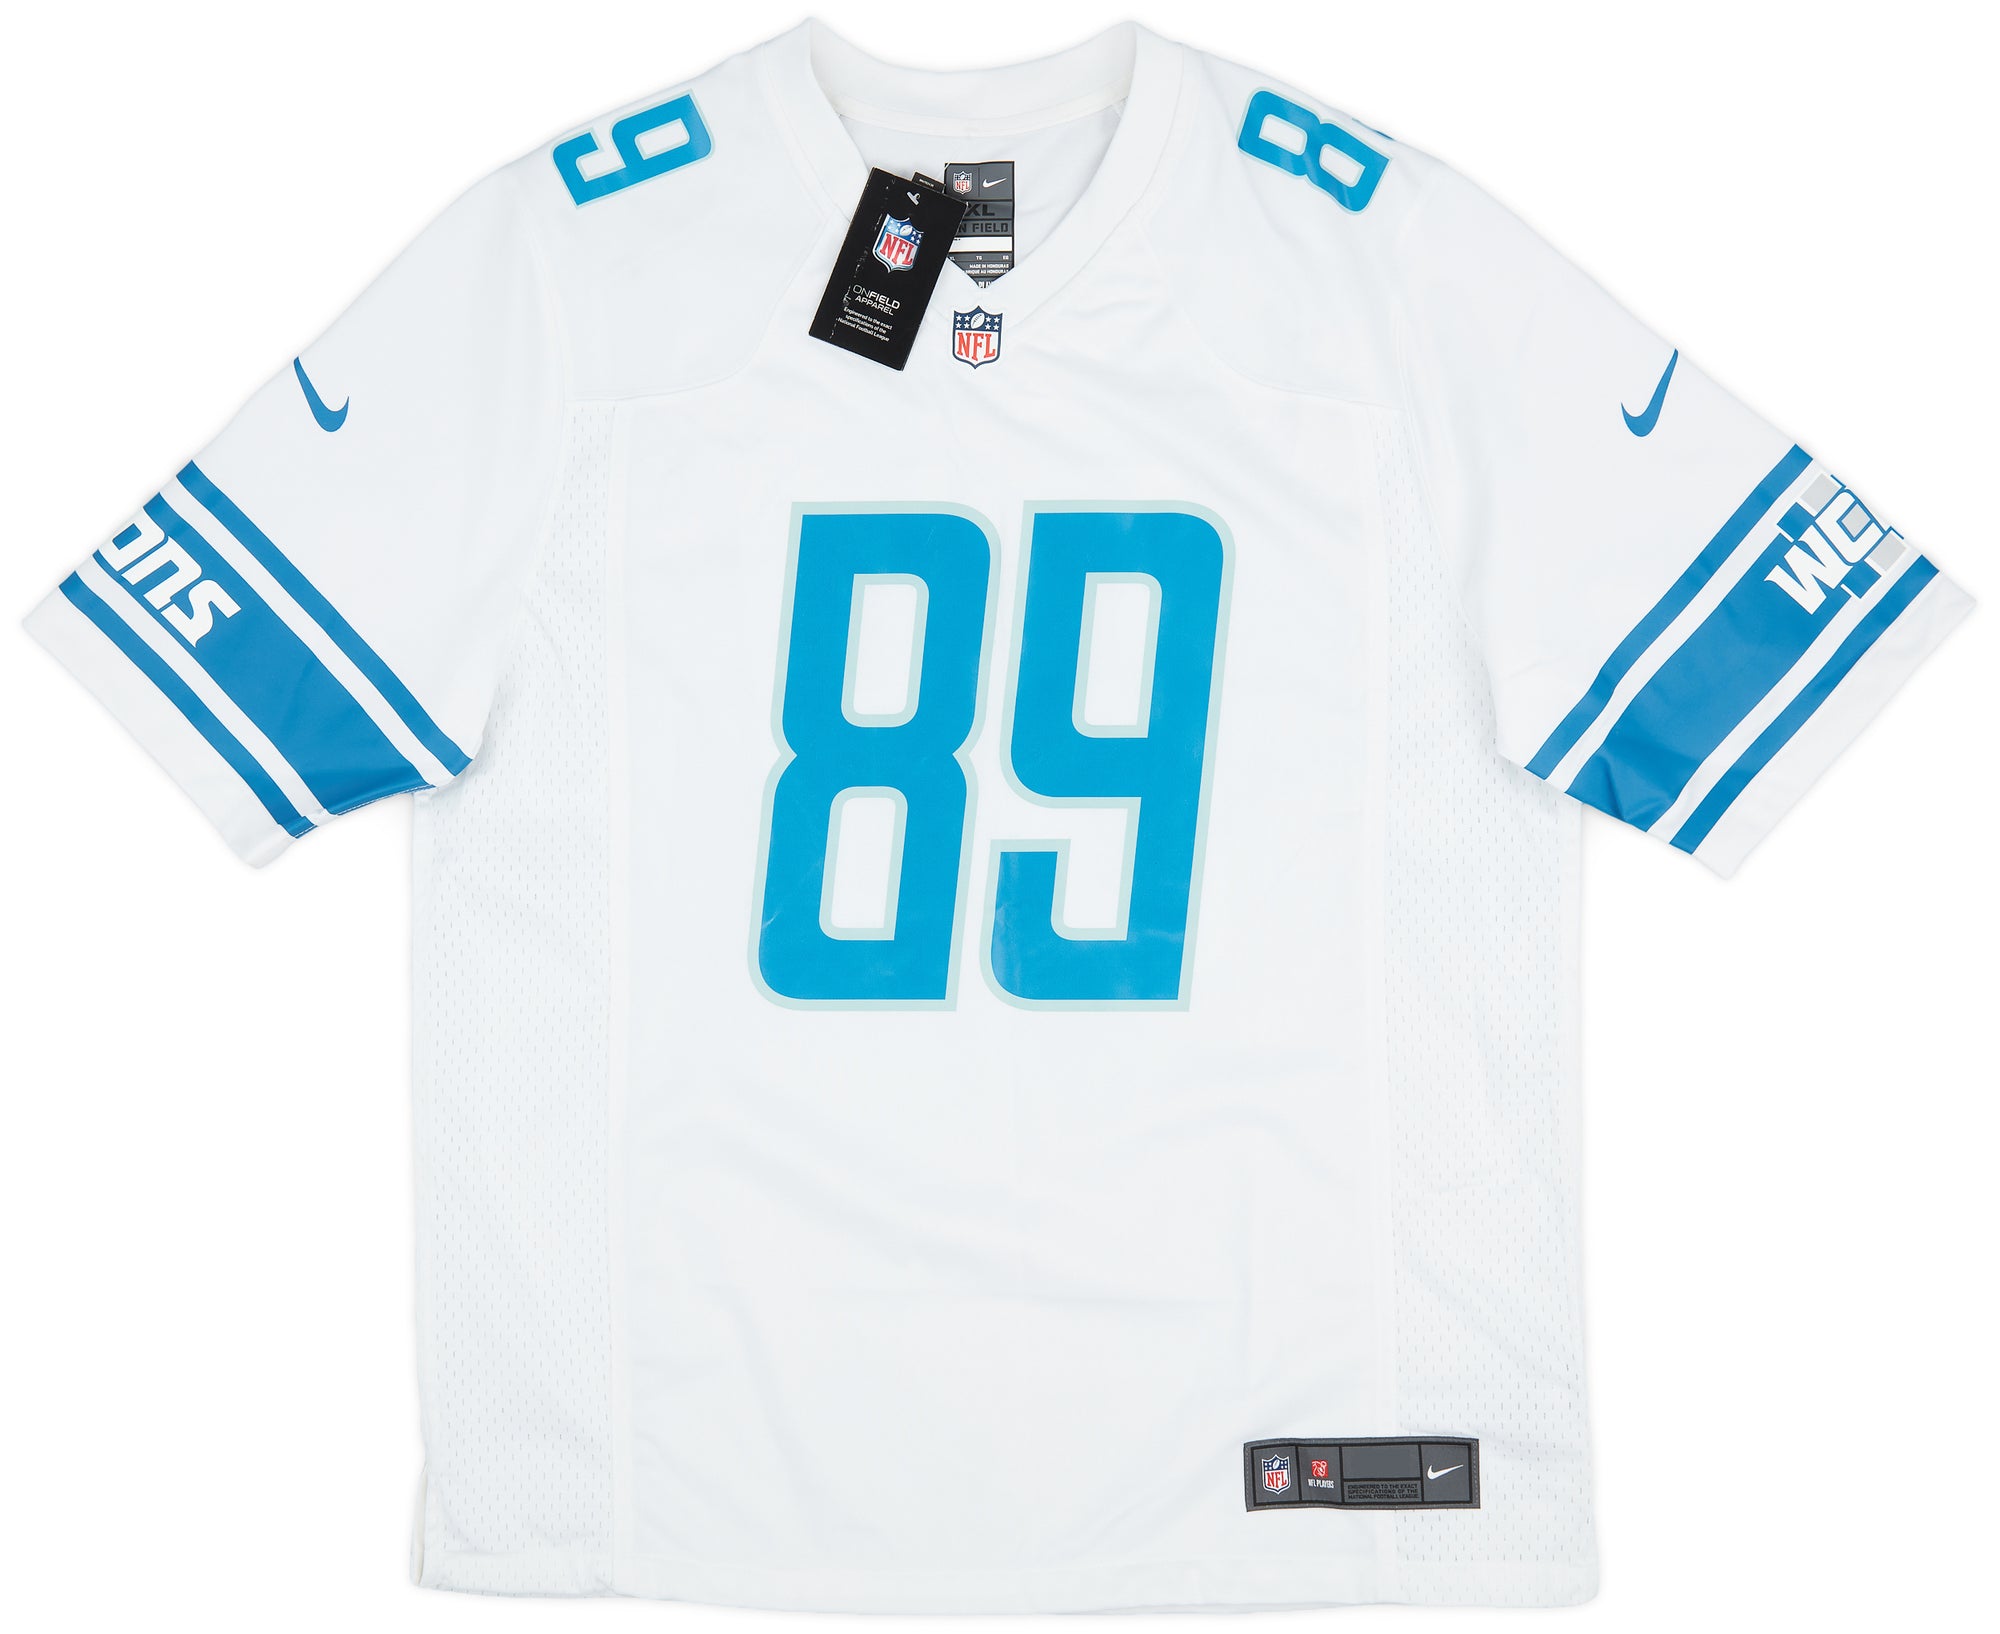 2021-23 DETROIT LIONS CAMPBELL #89 NIKE GAME JERSEY (AWAY) XL - W/TAGS